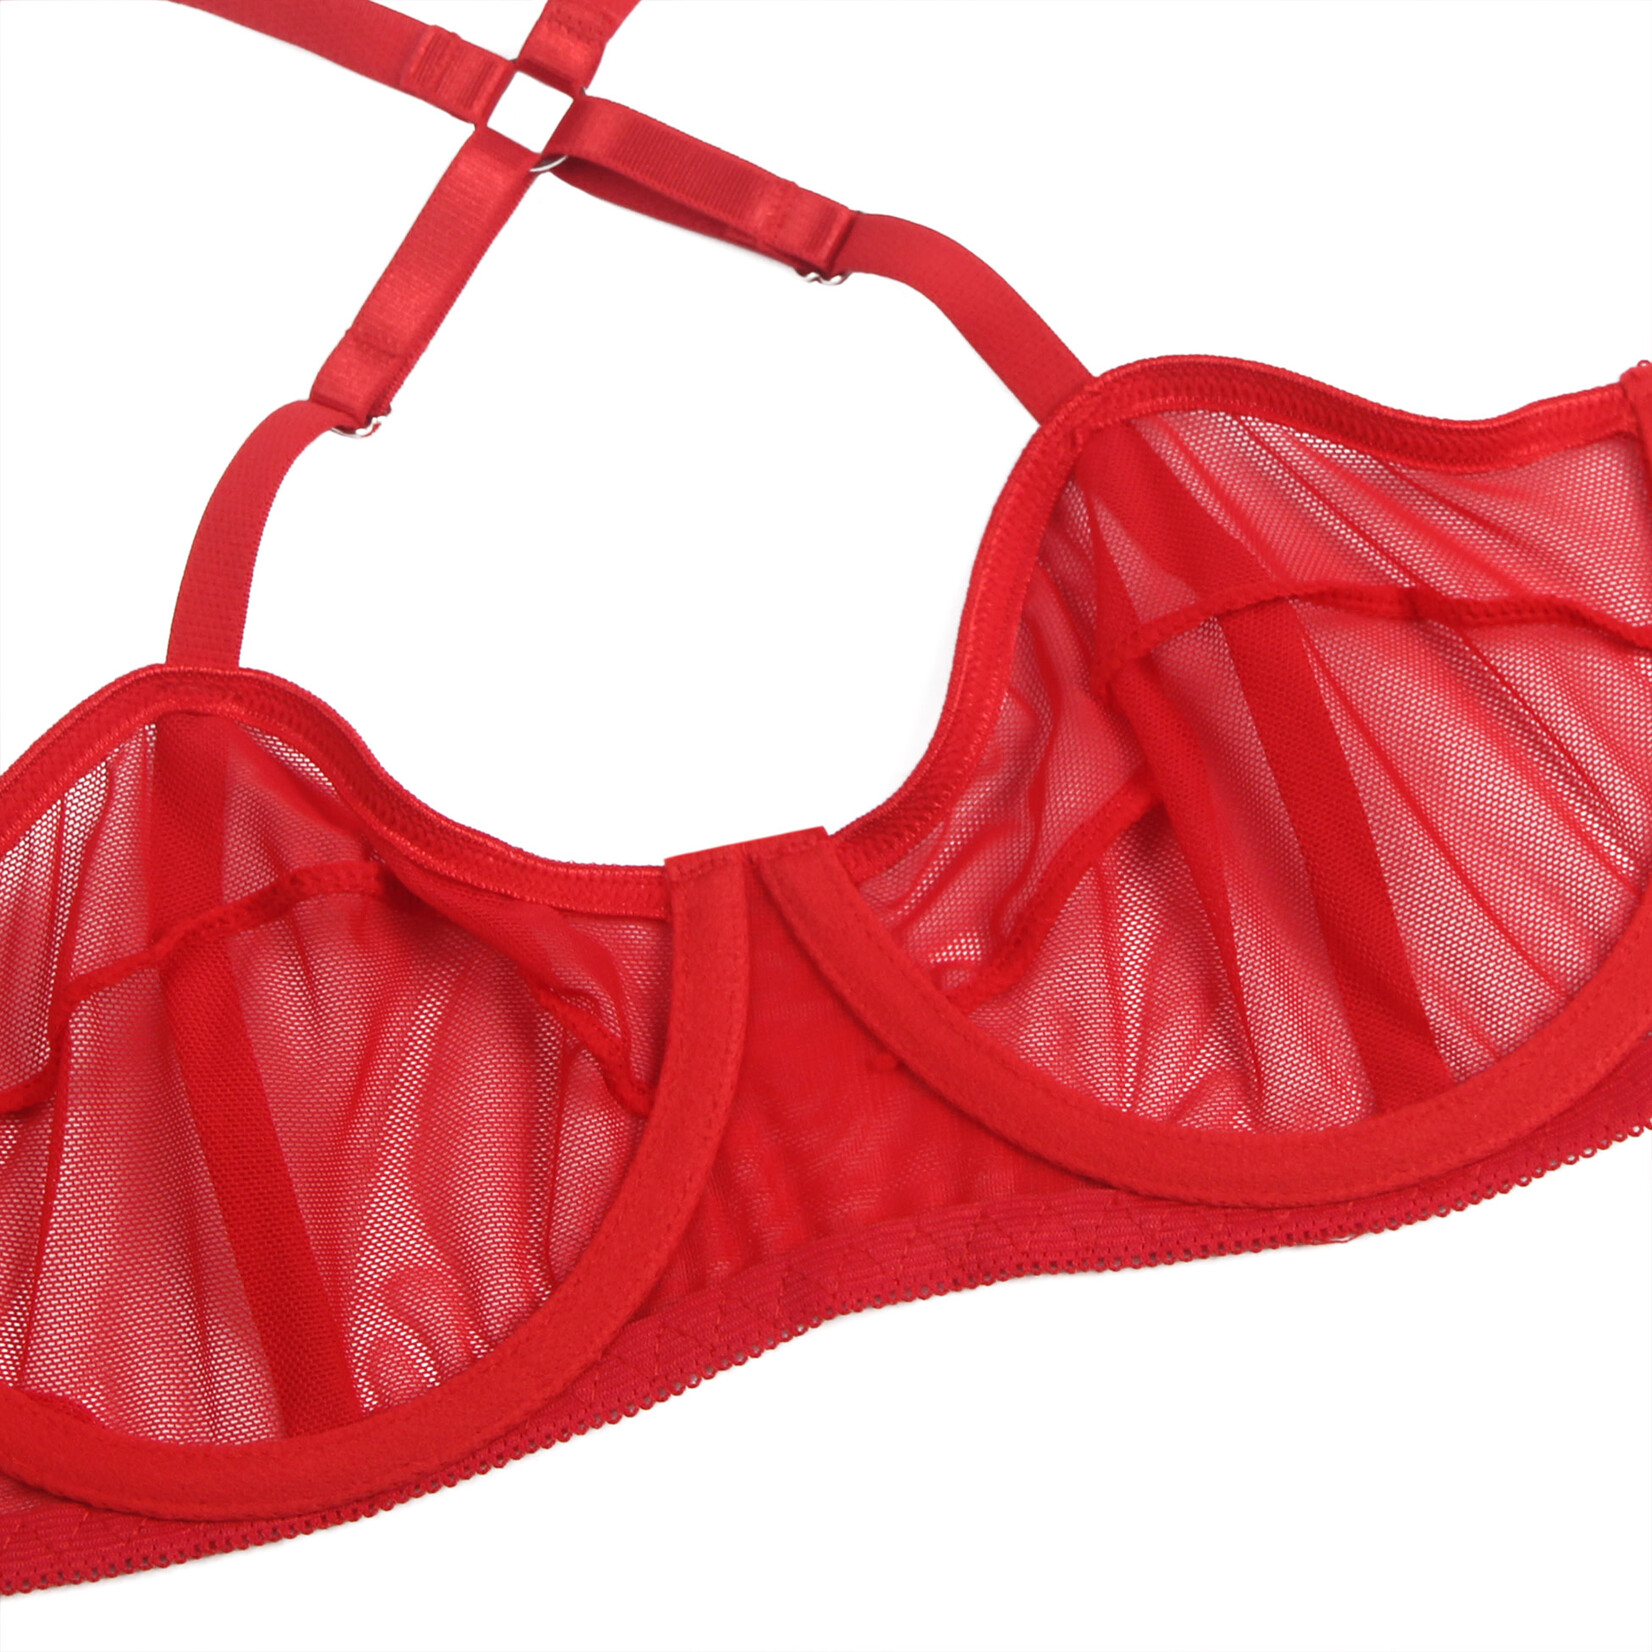 OH YEAH! -  RED MESH UNDERWIRE GARTER LINGERIE SET M-L